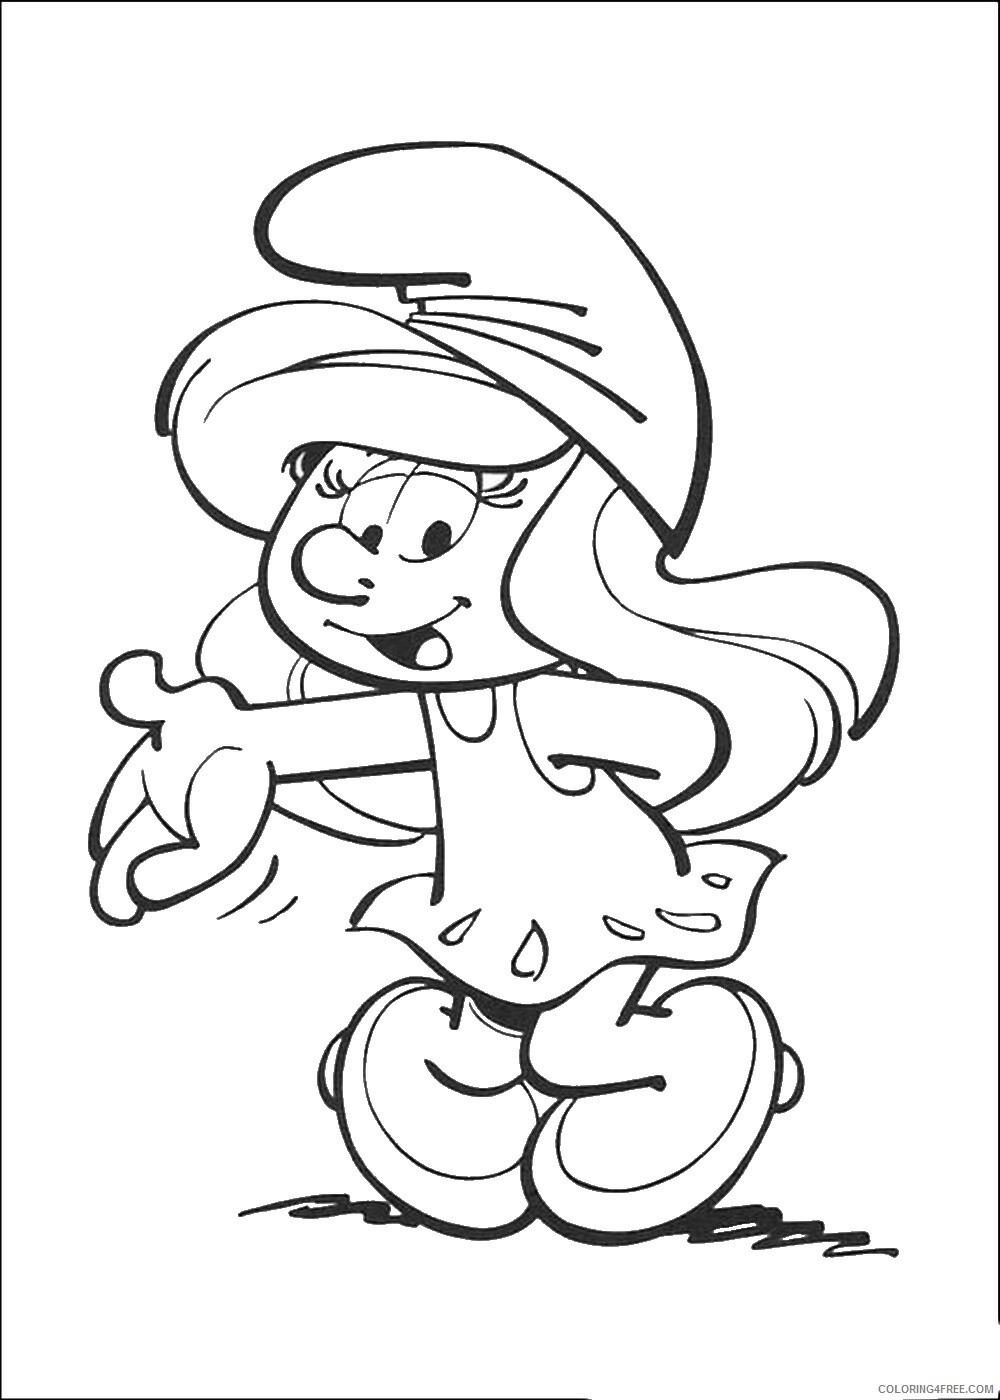 The Smurfs Coloring Pages TV Film smurfs_20 Printable 2020 09721 Coloring4free